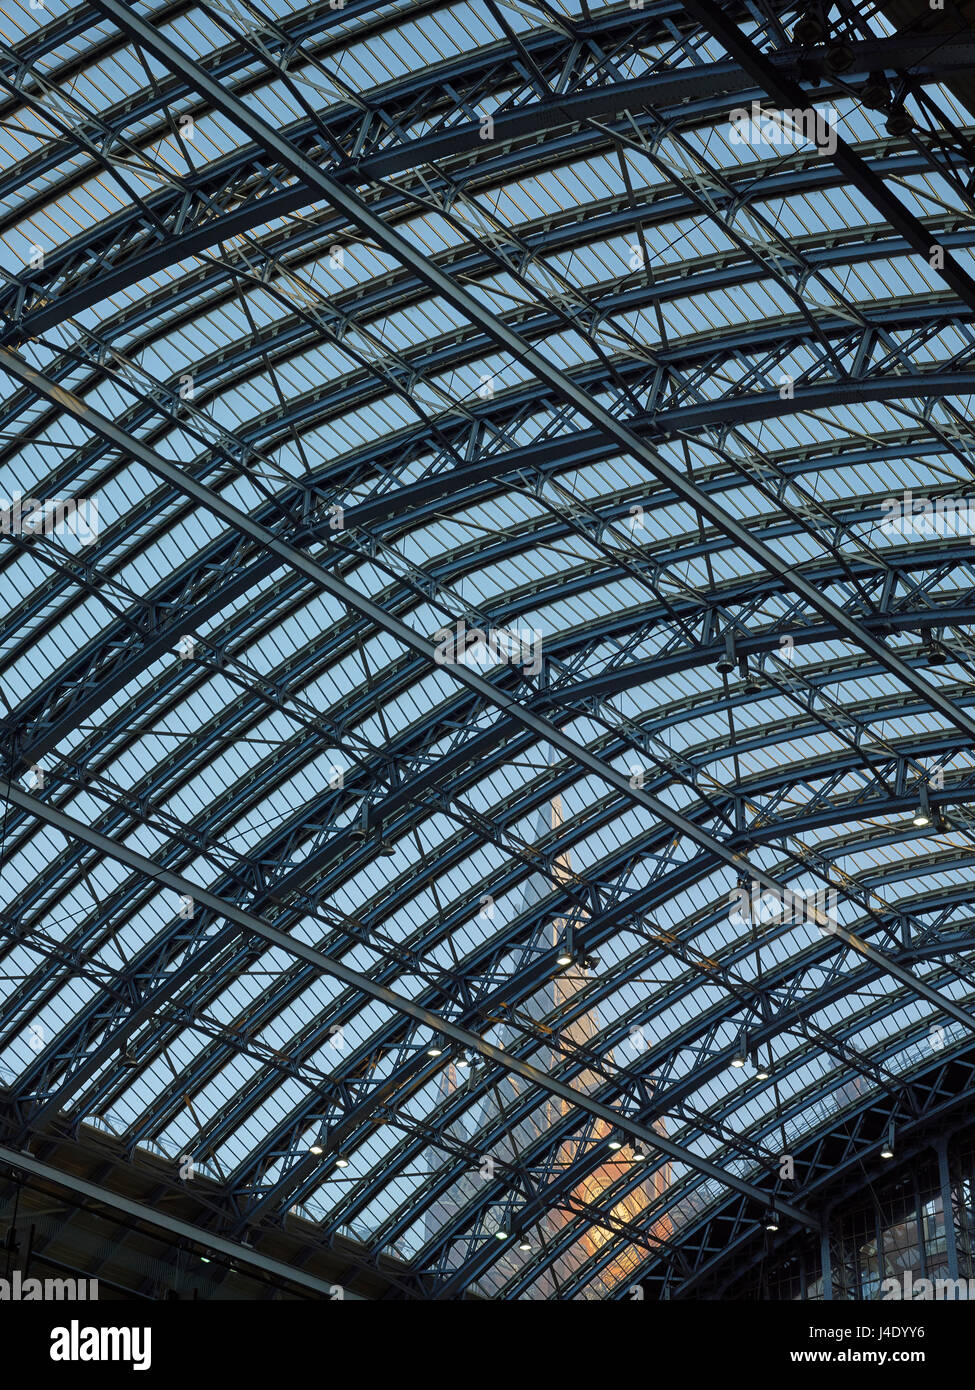 St Pancras Station, London. Trainshed, by William Barlow for Midland Railway in the 1860s. With  Gothic clock tower of the Midland Grand Hotel. Stock Photo